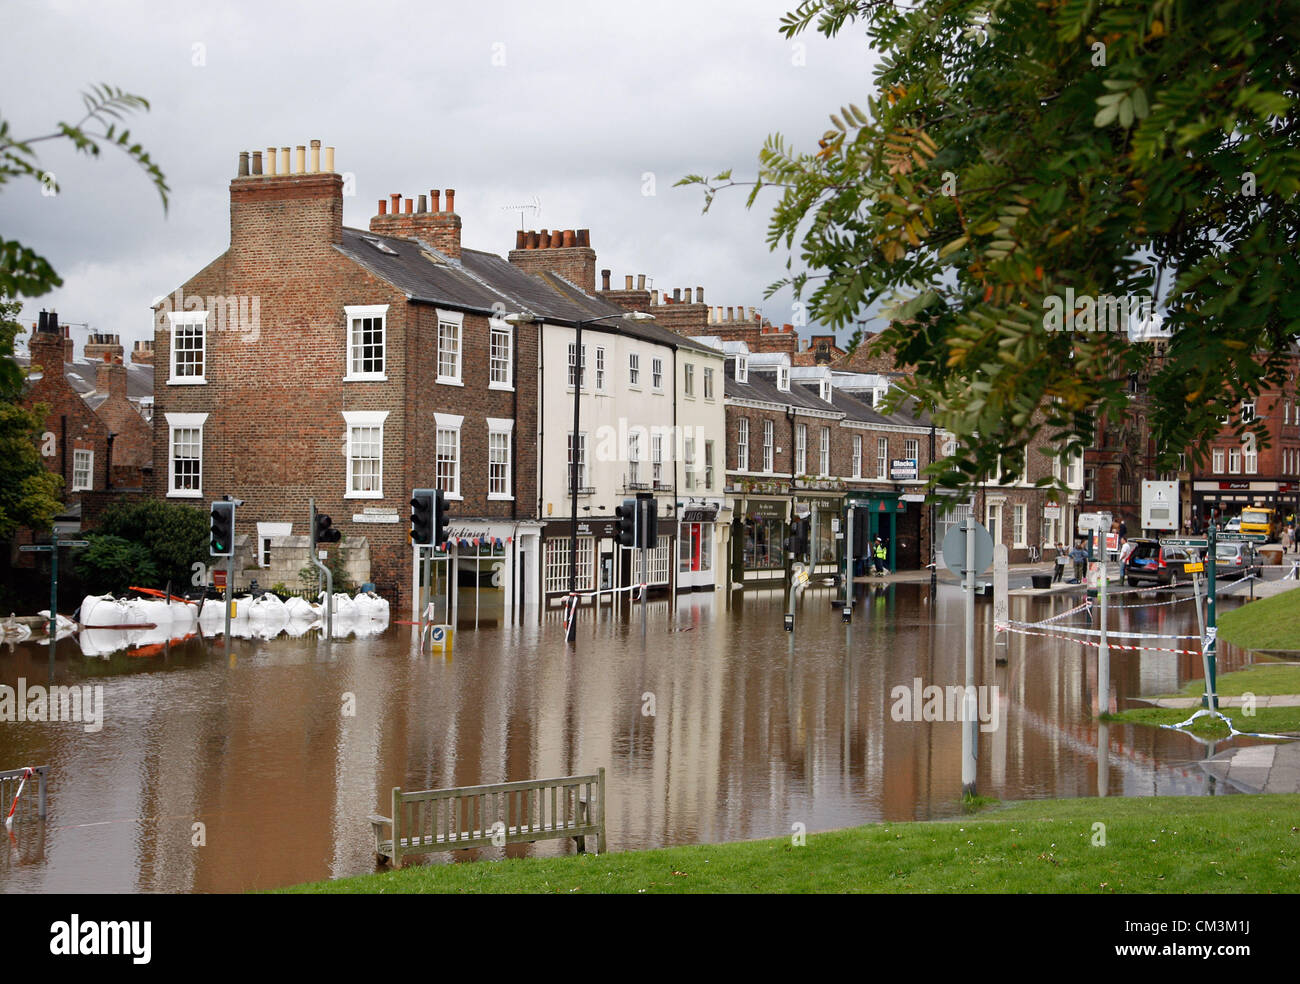 LOCAS BUSINESSES UNDER WATER CITY OF YORK CITY OF YORK NORTH YORKSHIRE ENGLAND 27 September 2012 Stock Photo